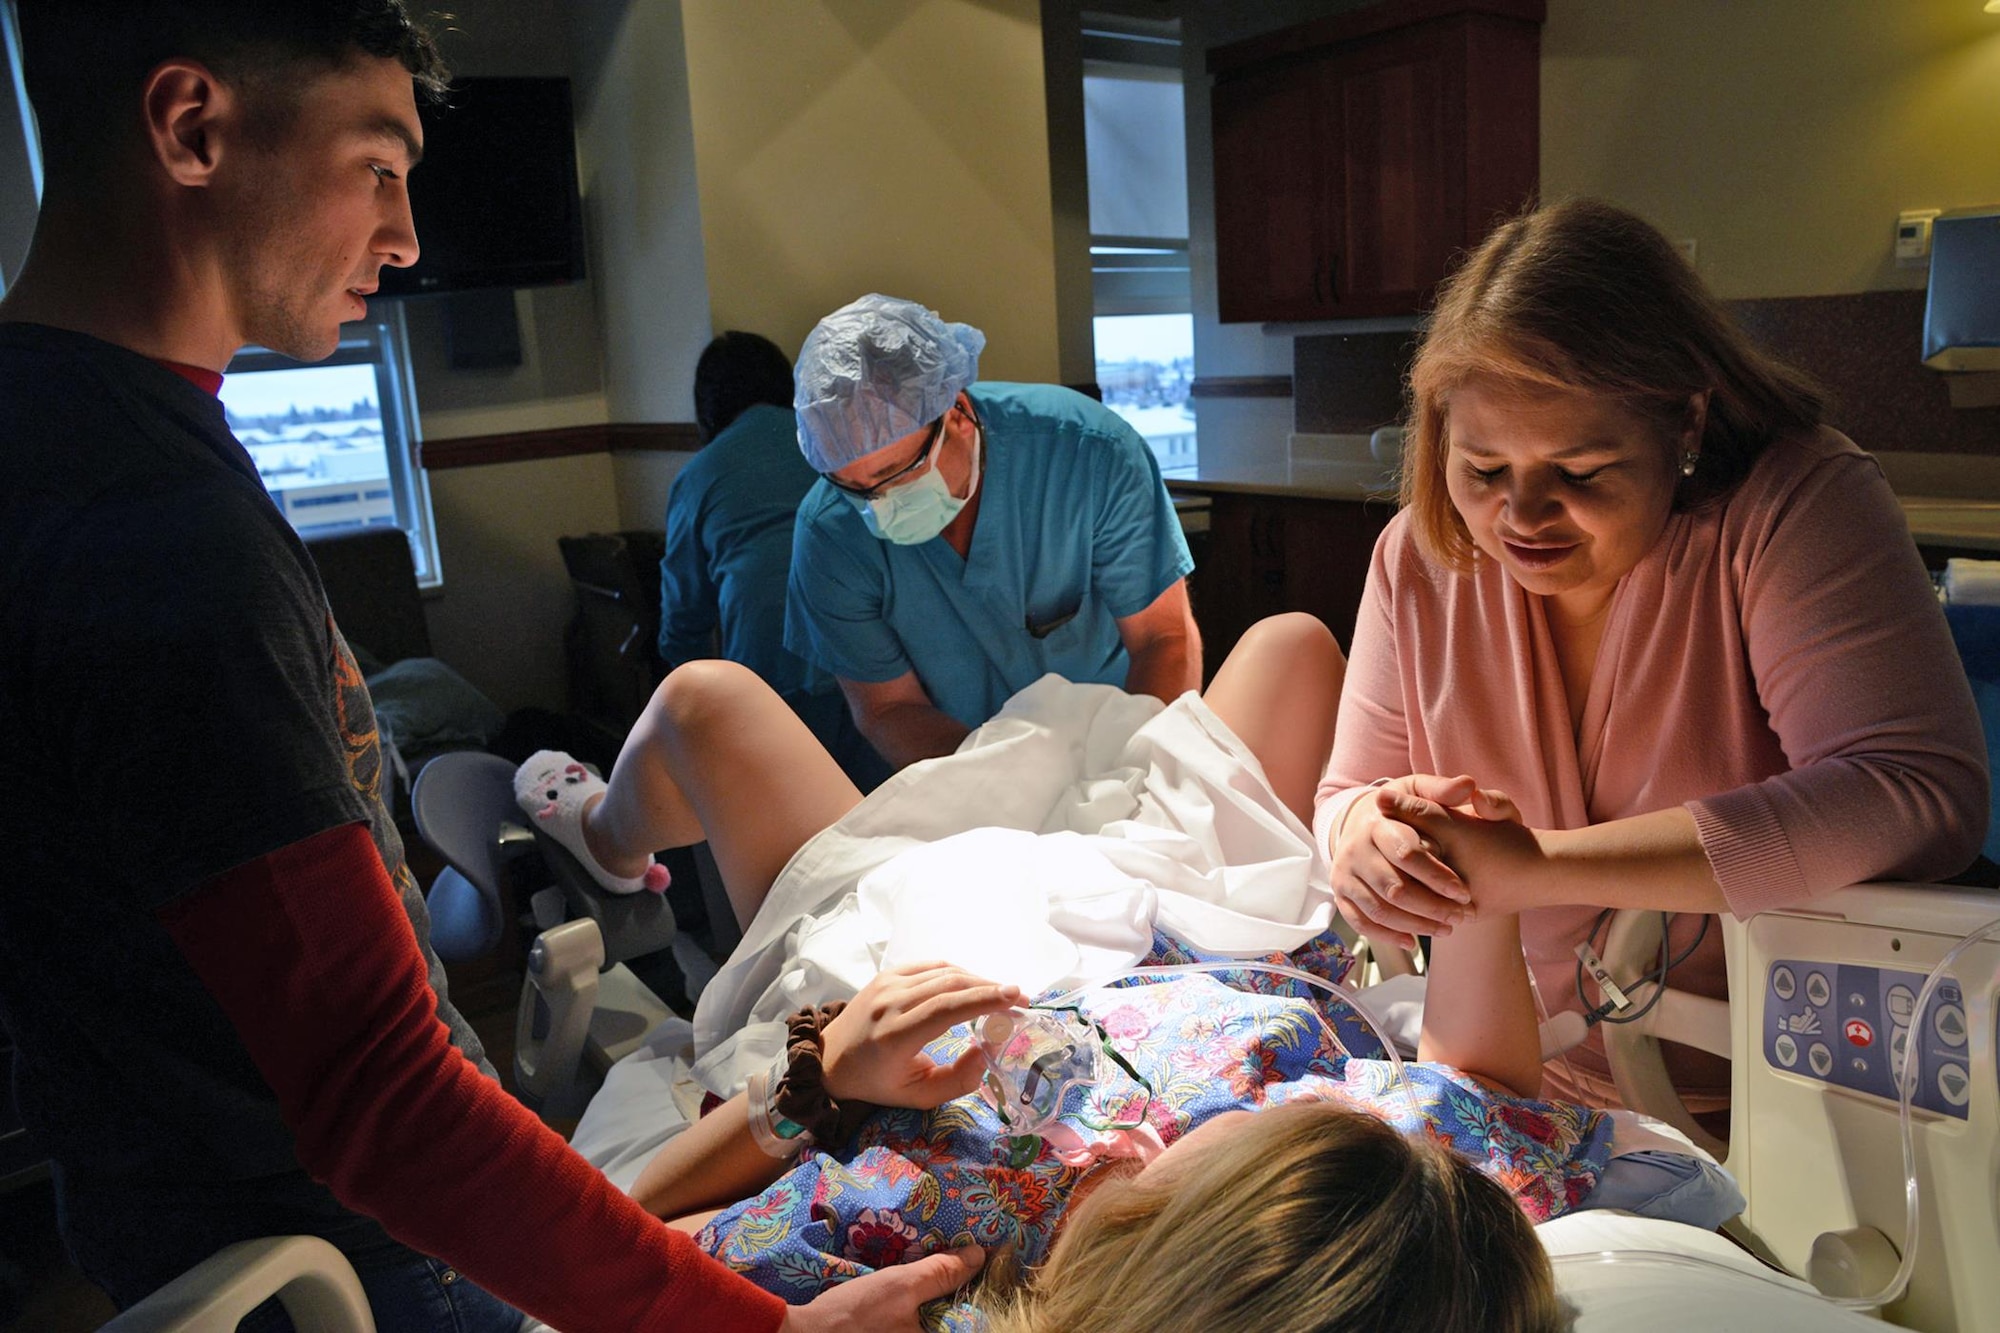 Staff Sgt. Grace Hoyt, 341st Missile Wing chaplain assistant, prepares to give birth to her surrogate baby with her husband, Austin, and the baby’s mother Gabby by her side Nov. 9, 2017, at Benfis Health System, Great Falls, Mont.